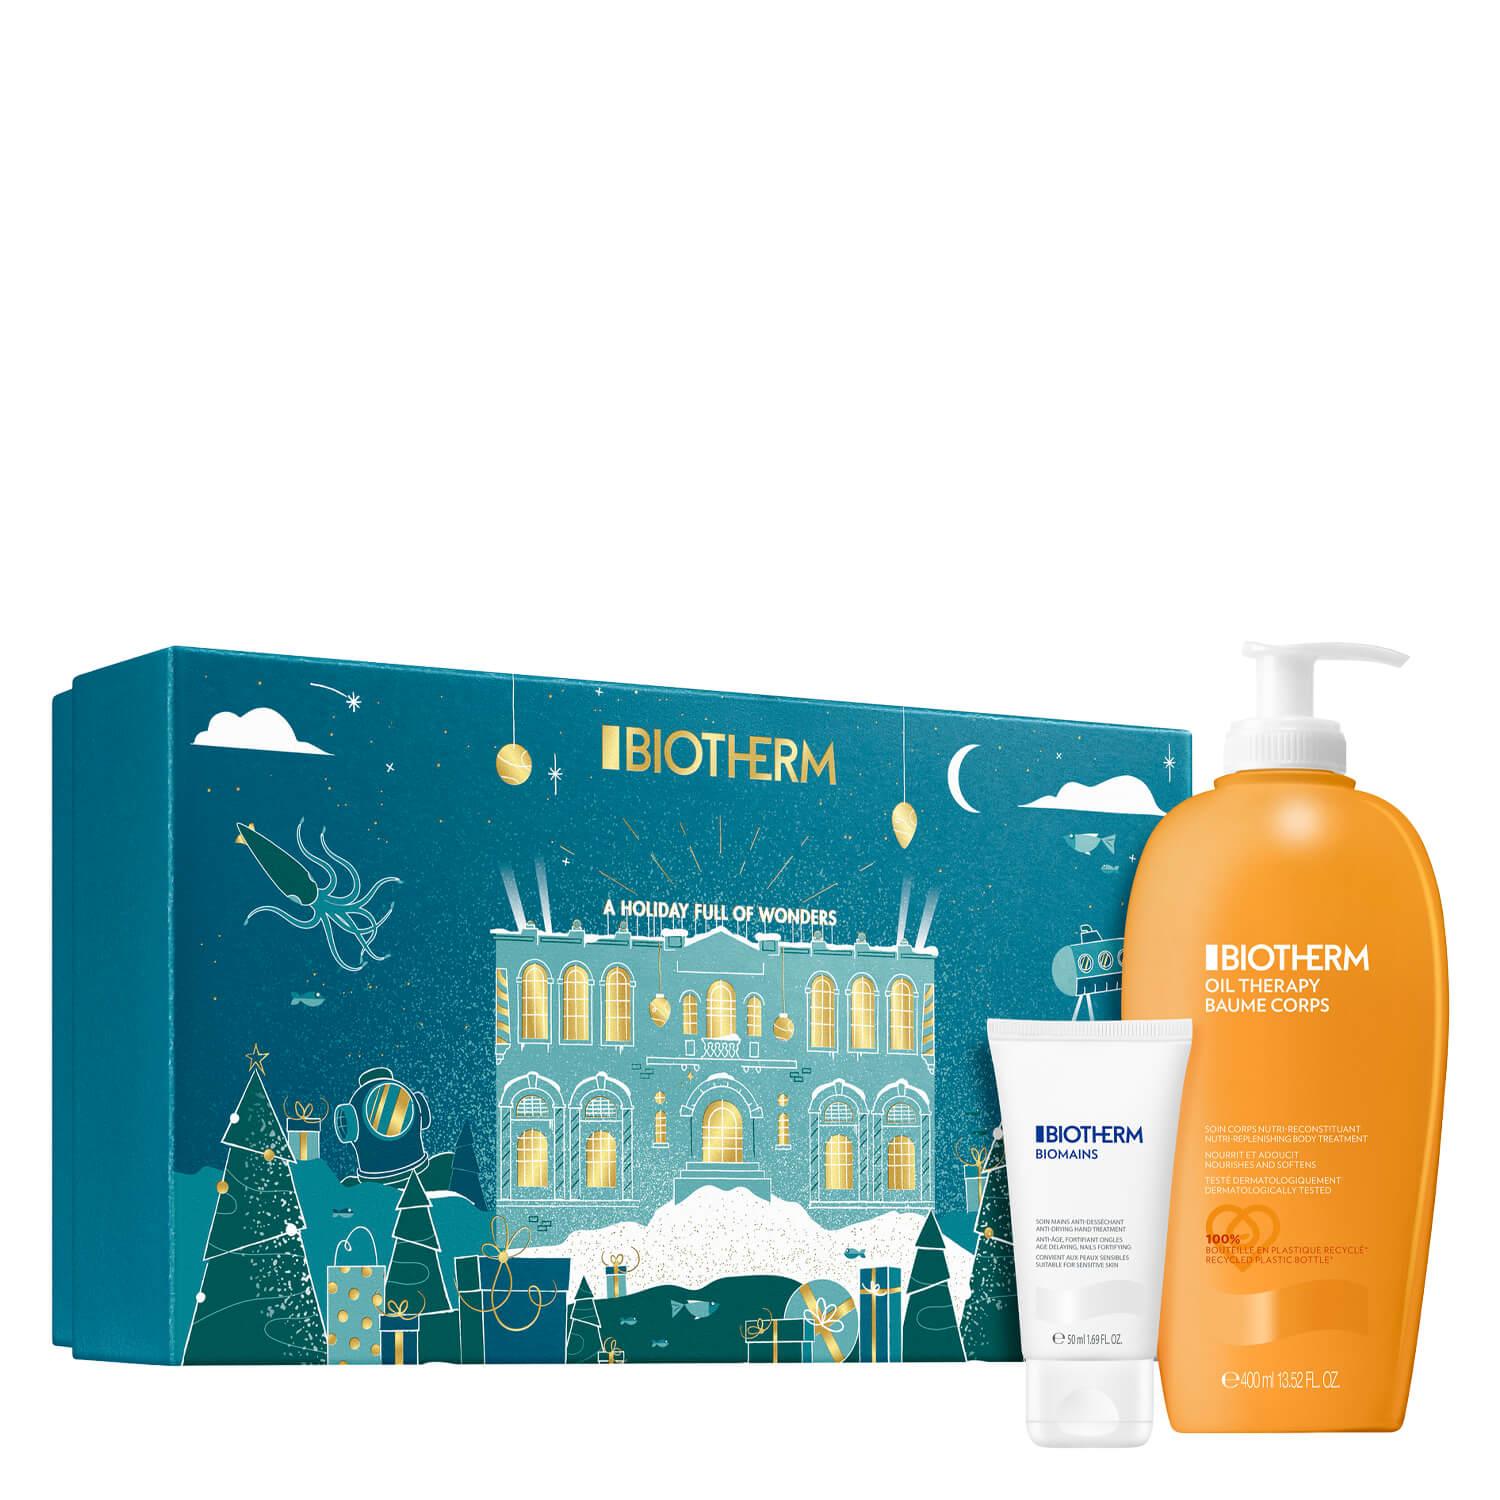 Biotherm Specials - Baume Corps Set